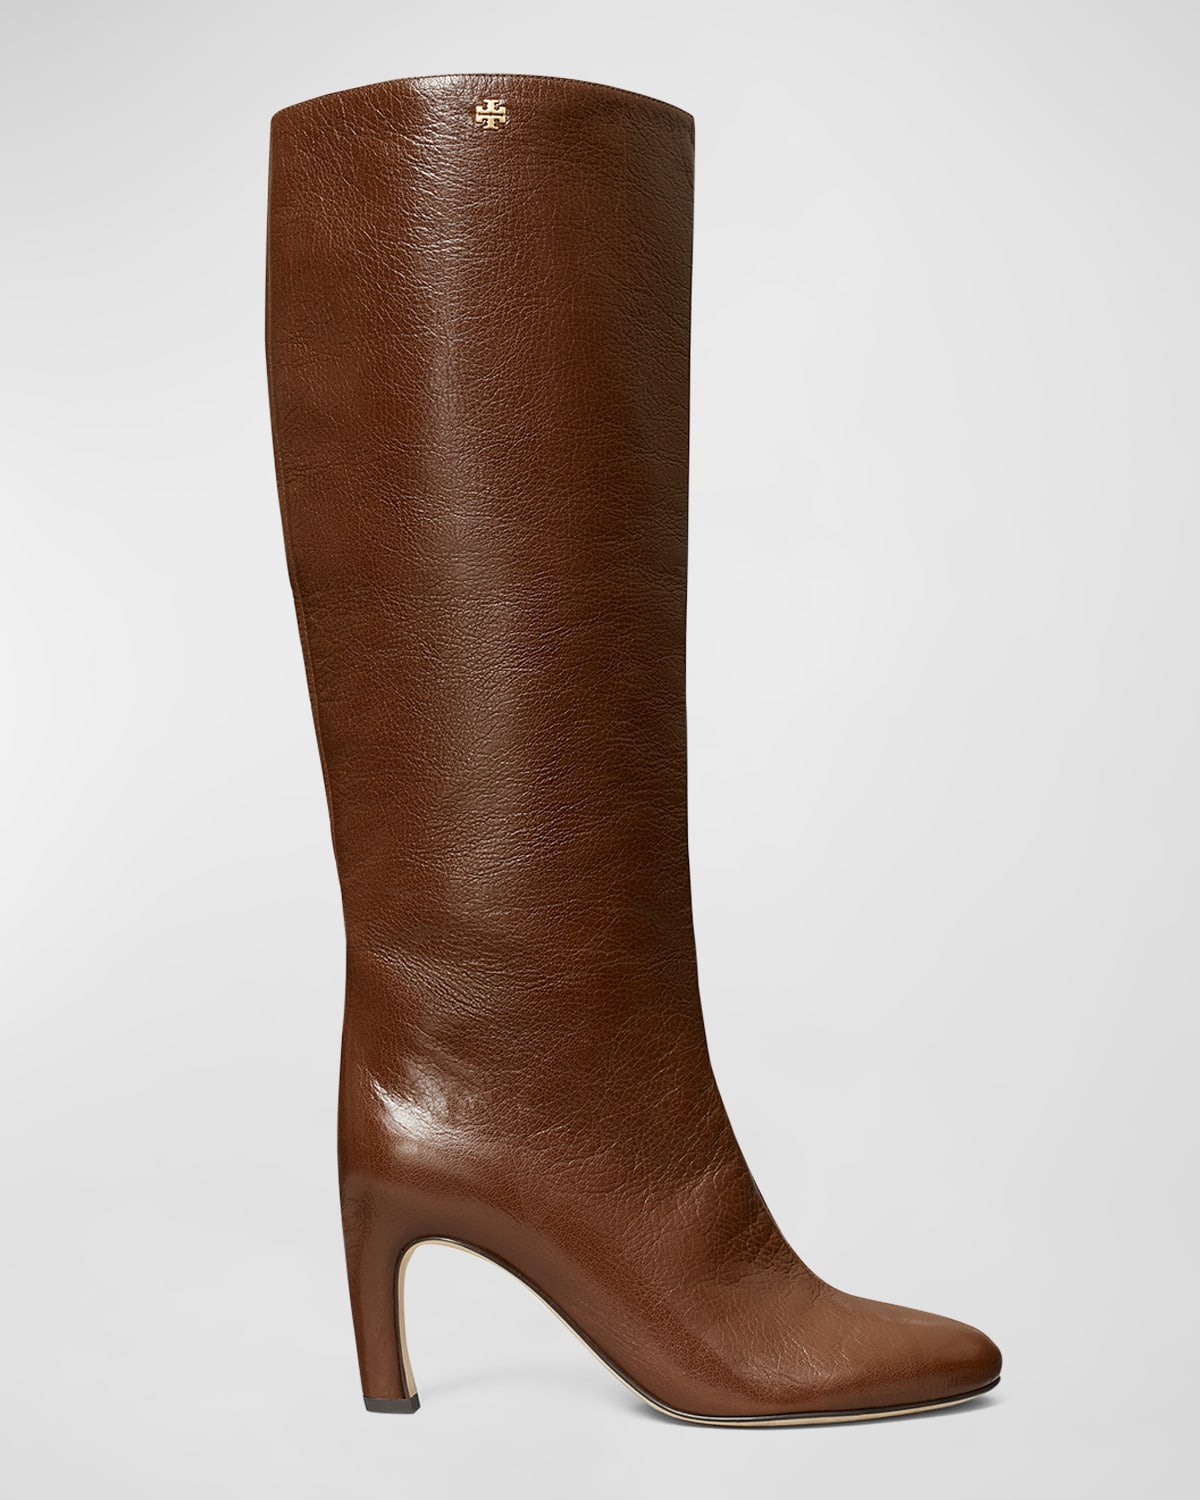 TORY BURCH LEATHER TALL PULL-ON BOOTS